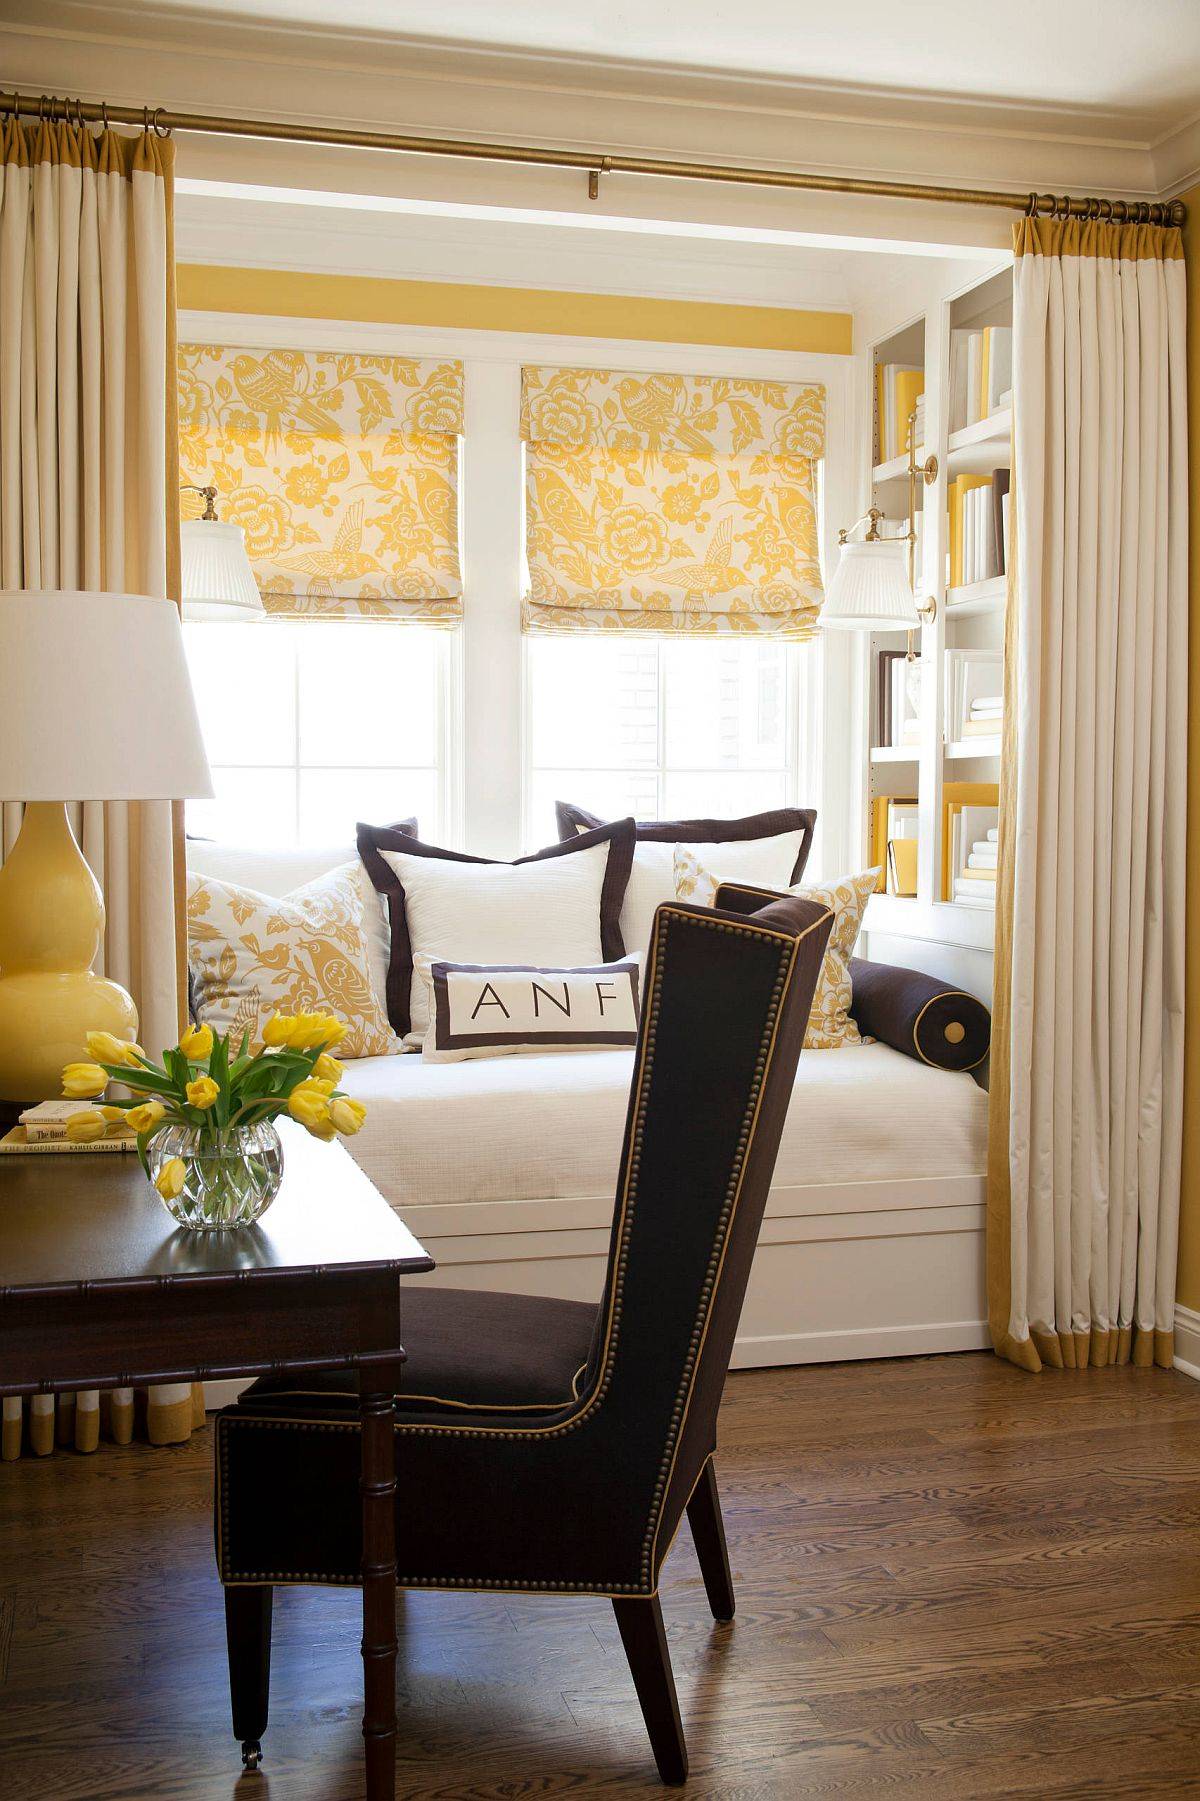 Drapes for the window seat make it an even more dreamy and reclusive setting